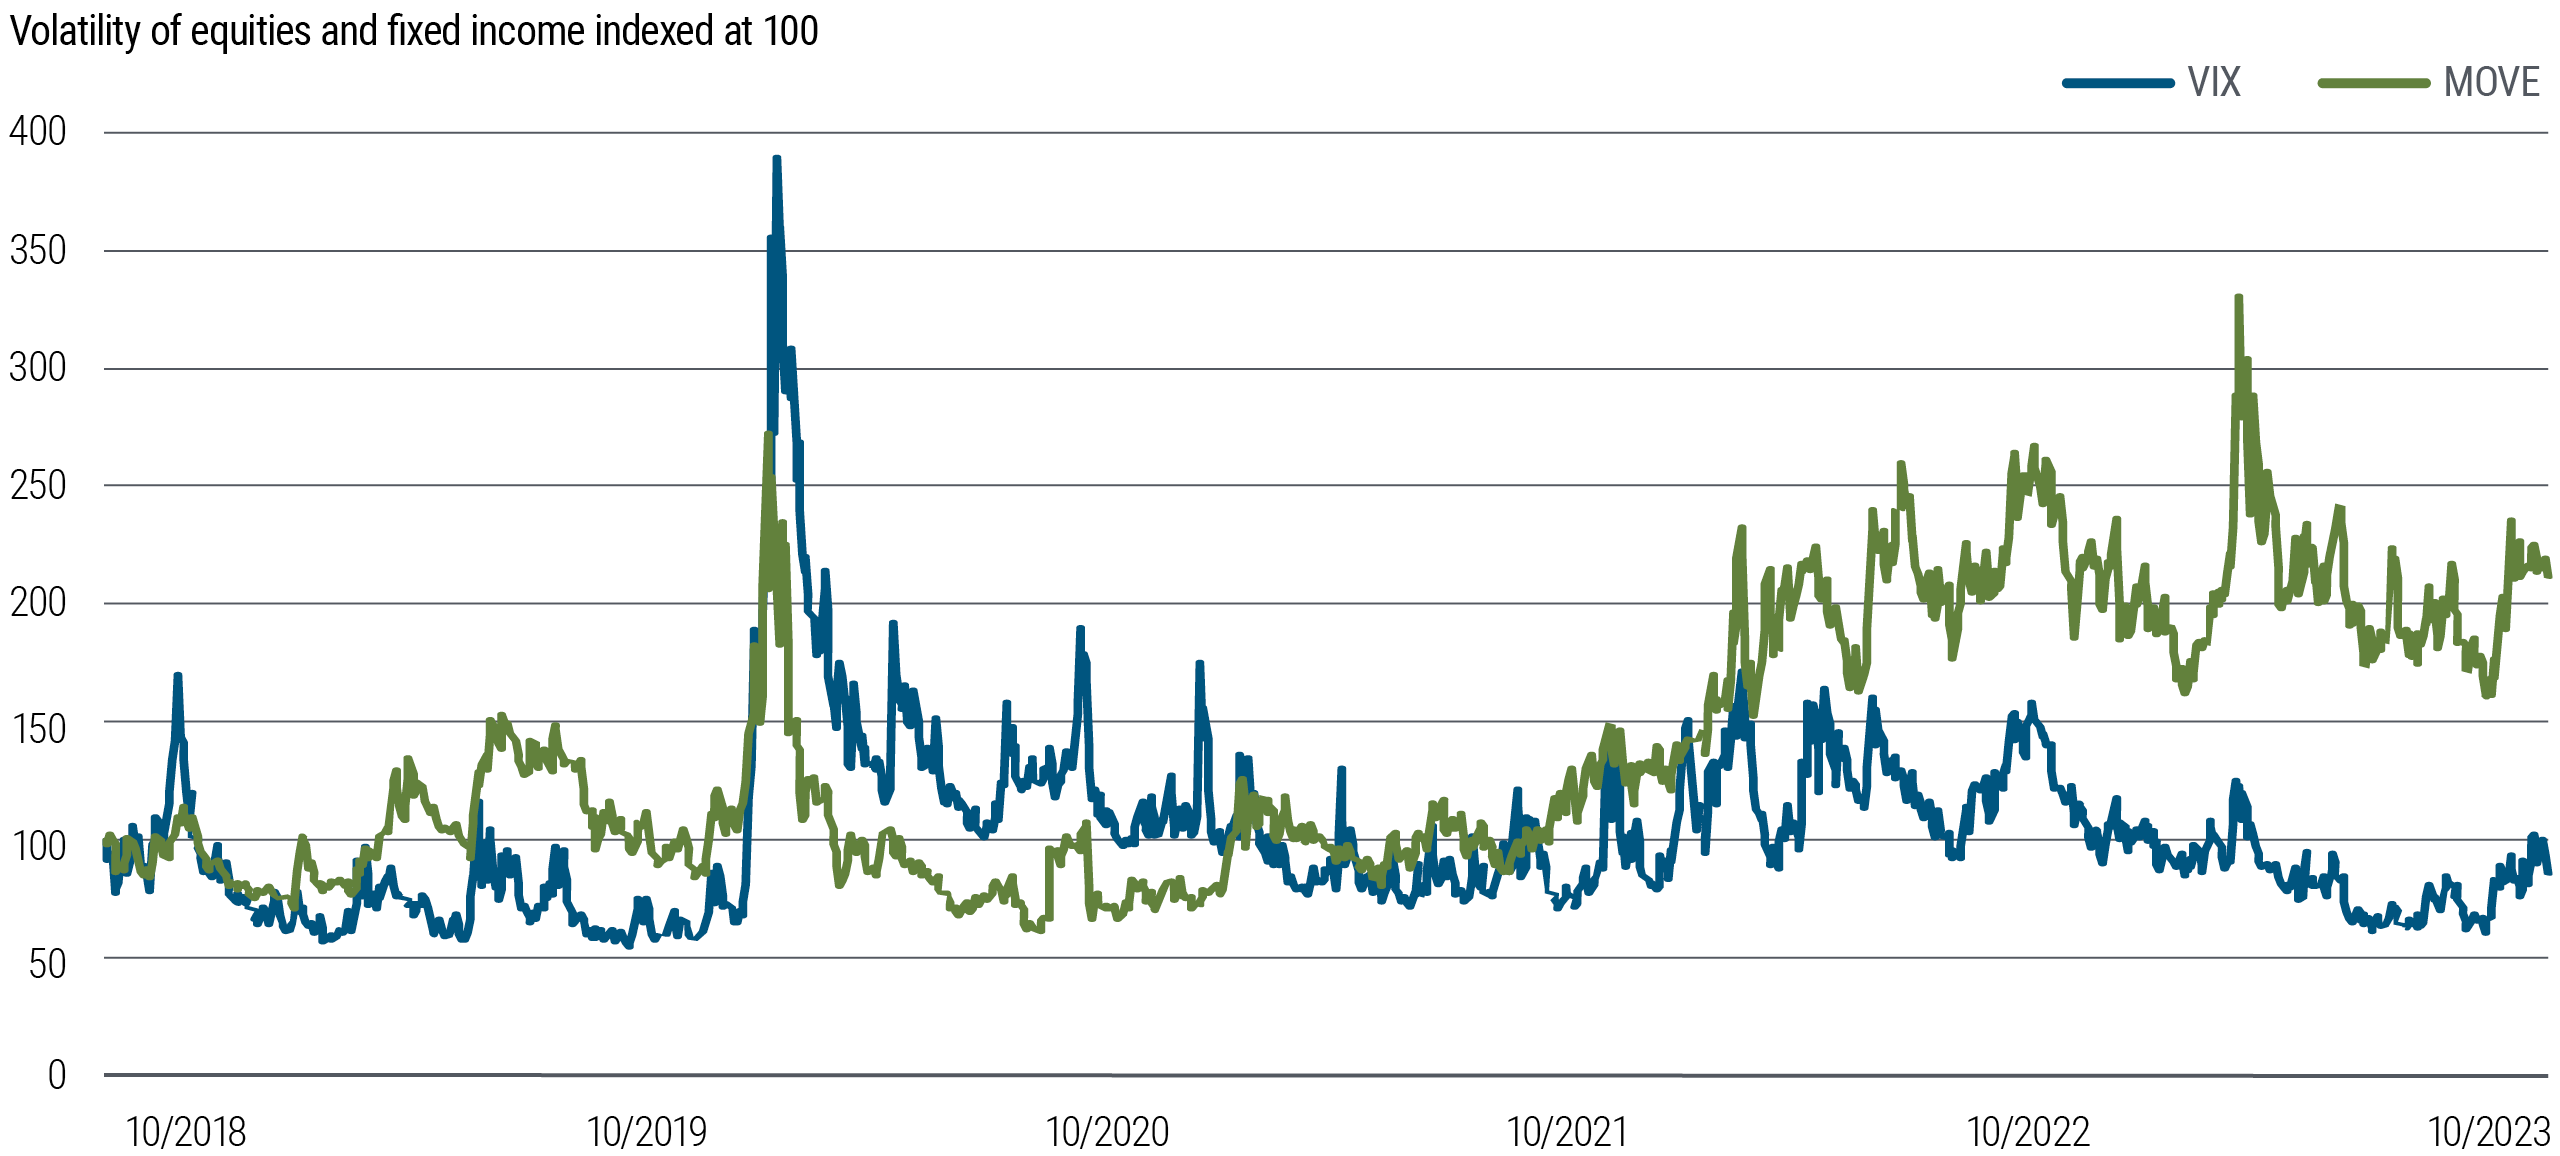 This is a line chart comparing volatility of equities and fixed income since October 2018. VIX is the Chicago Board Options Exchange (CBOE) Volatility Index, a measure of volatility in the S&P 500 stock index. MOVE is the ICE Bank of America MOVE Index, a measure of volatility in fixed income markets. Both measures are indexed to 100 in October 2018. Since then, the VIX Index reached a high of 390 in March 2020 and more recently touched a 2023 year-to-date high of 120, but as of October 2023 is down to 85. The MOVE Index reached a high of 270 in March 2020, and is now at around 210. The MOVE has been above the VIX since early 2022. Source: Bloomberg data.